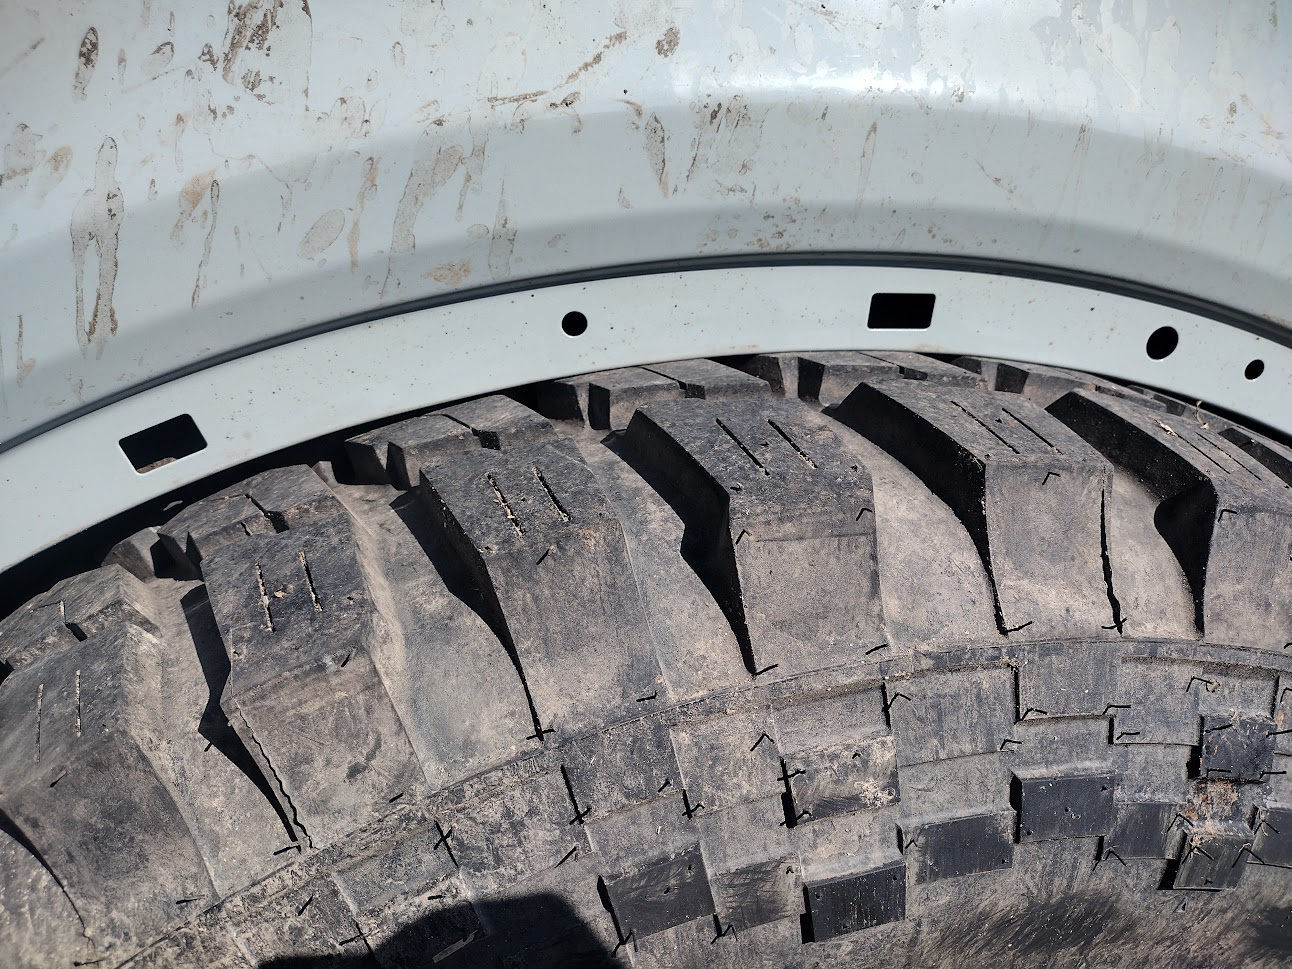 Ford Bronco 37" Tires on a Non-Sasquatch Badlands - My Experience, Results, Pics 20221024_170210